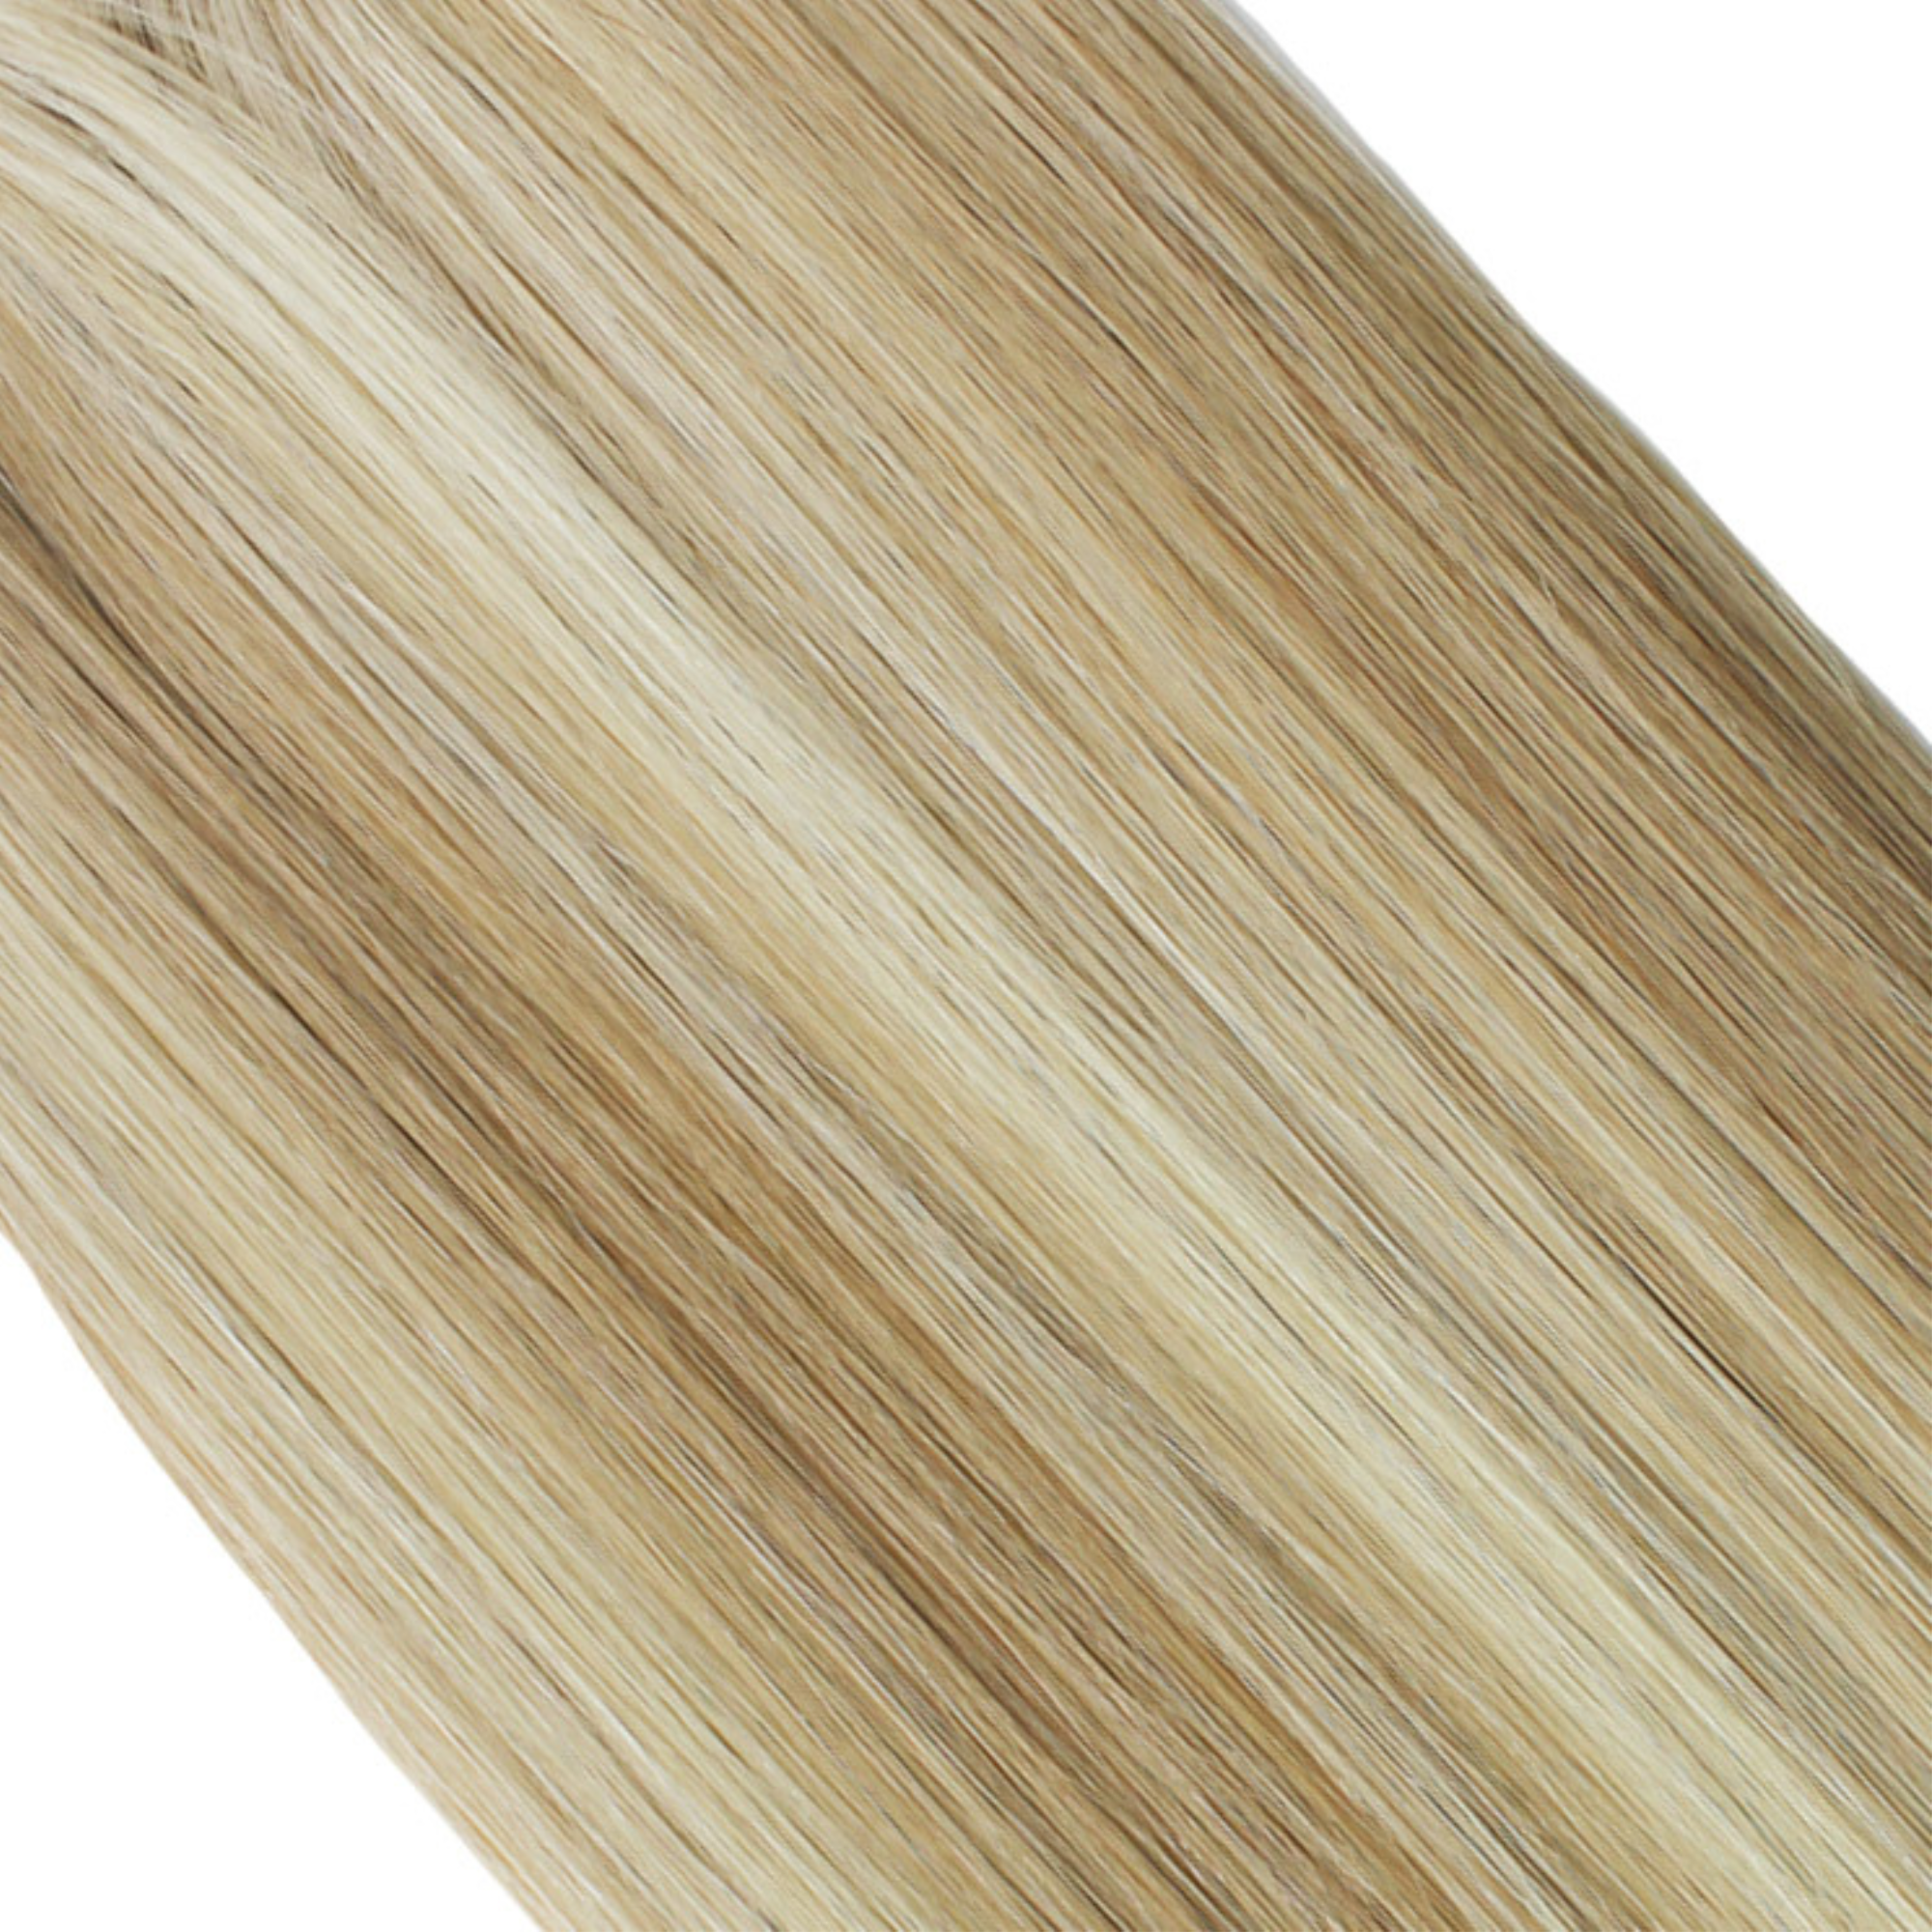 "hair rehab london 14" weft hair extensions shade swatch titled coachella blonde"